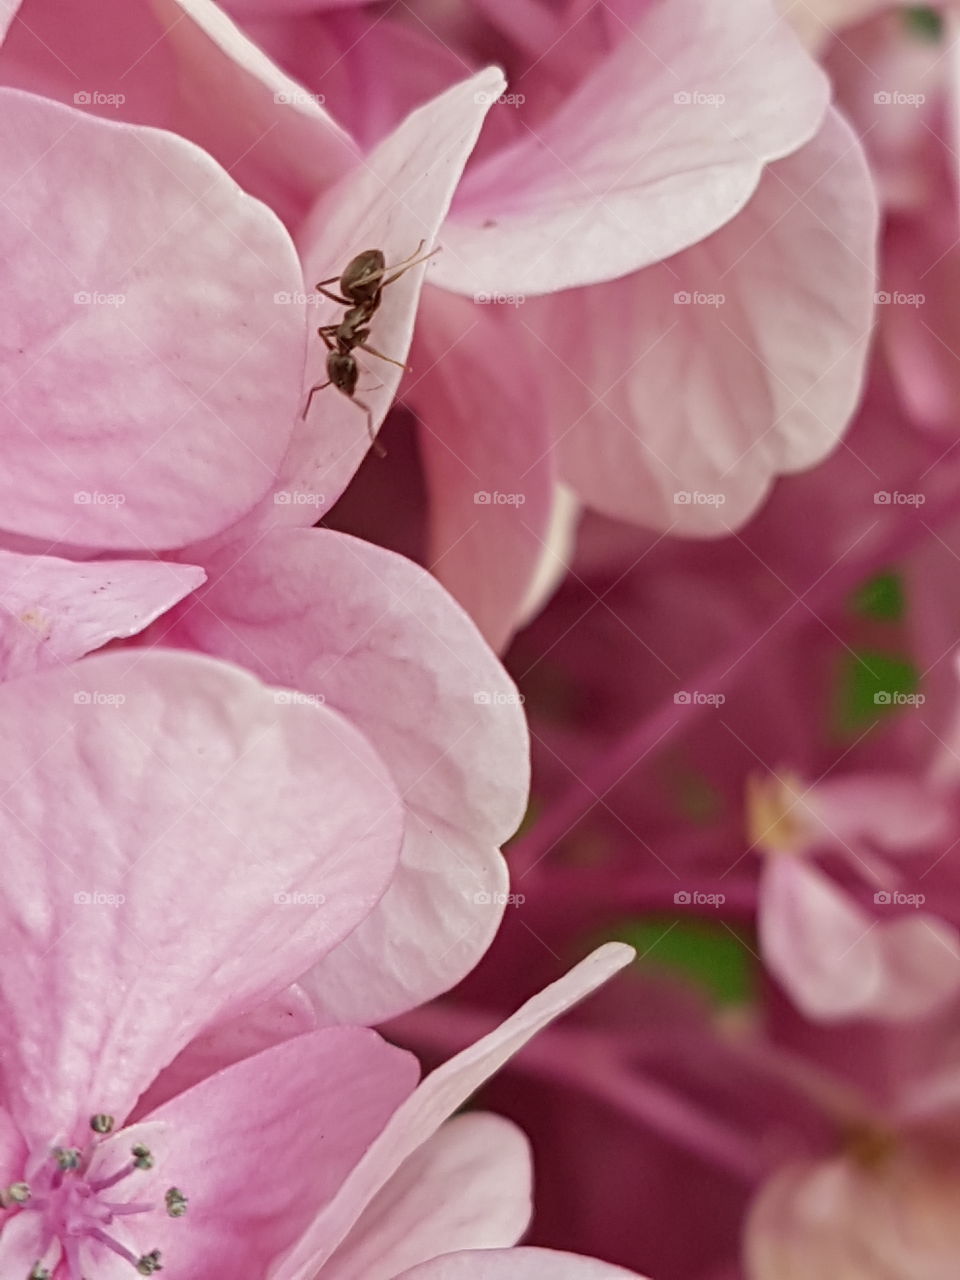 green nature and pink flower whith ant anthill